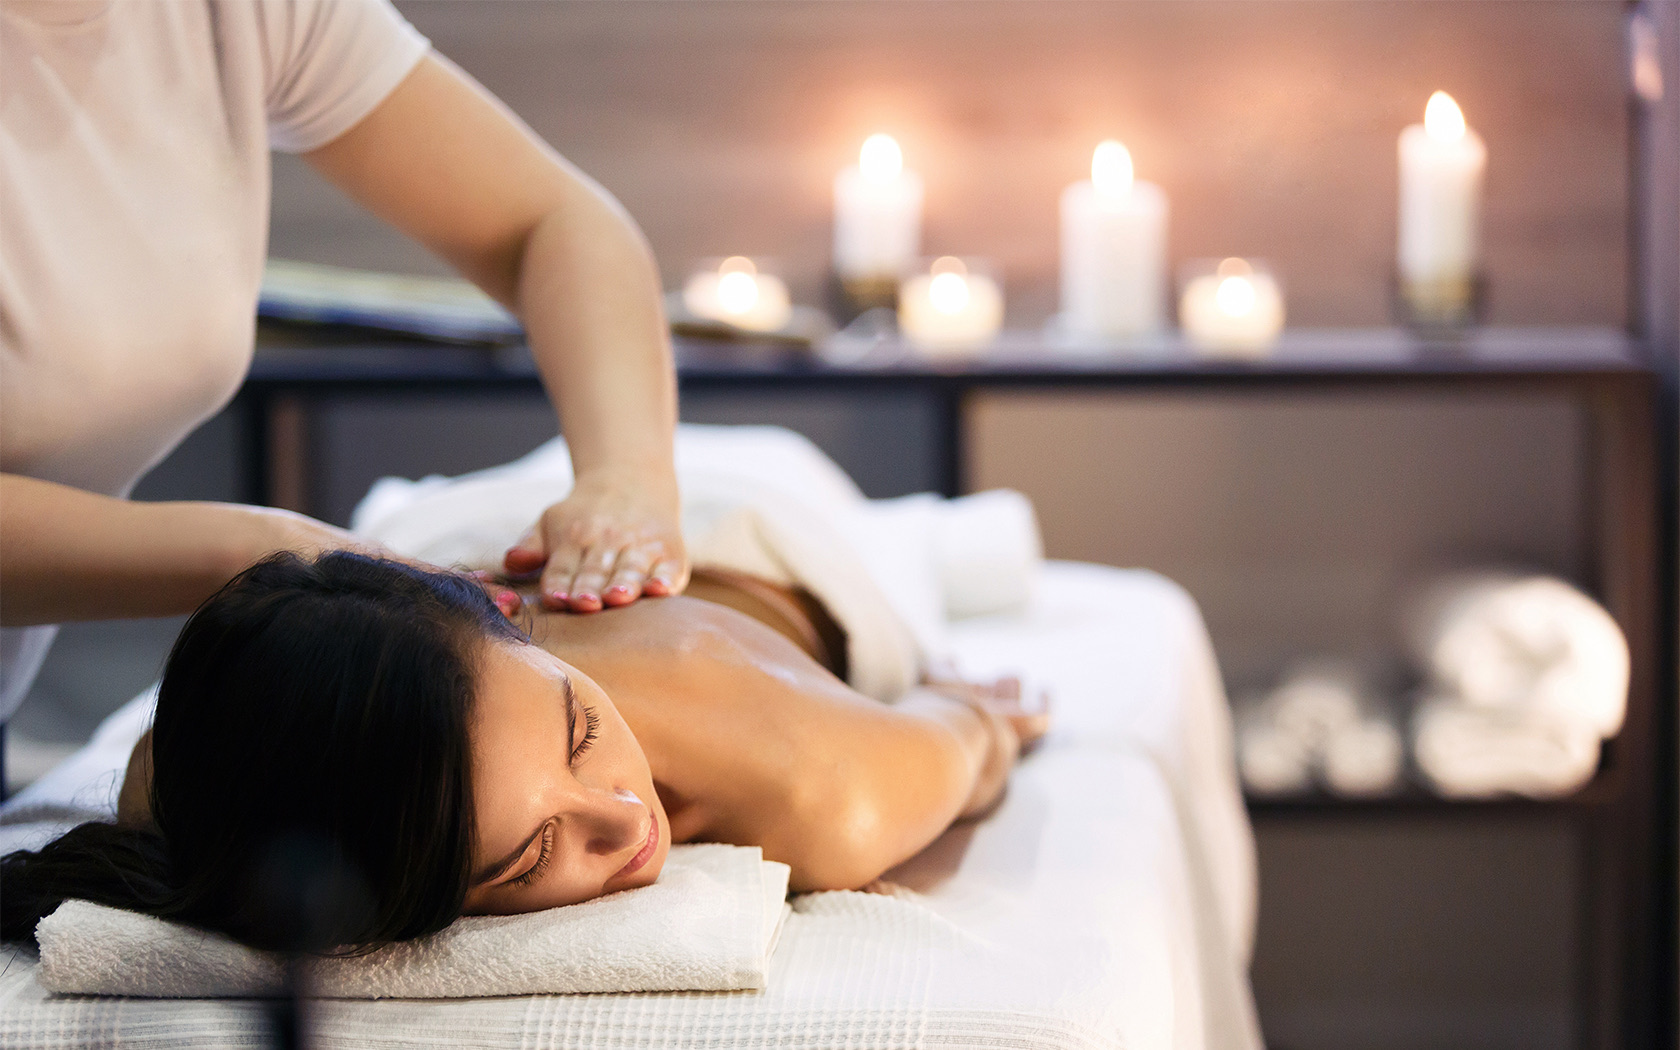 Woman getting a back massage at spa